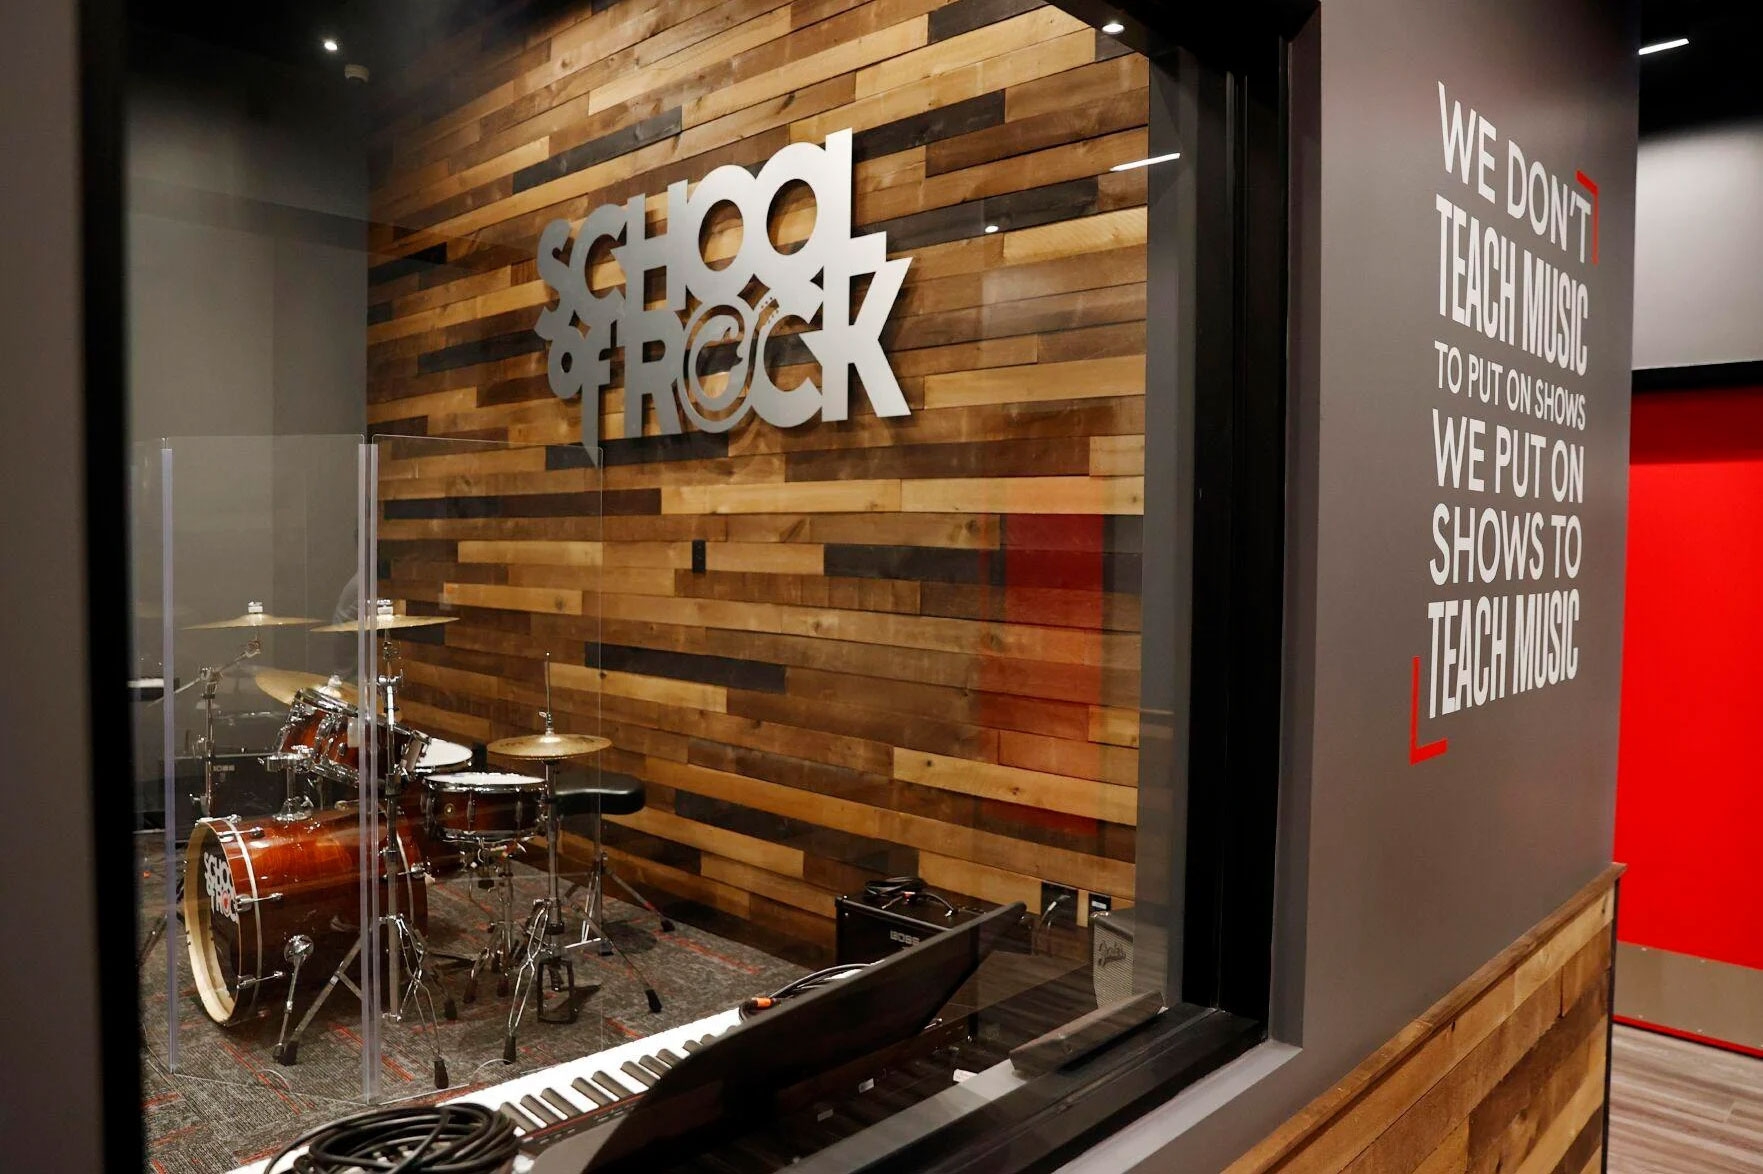 School of Rock, which has over 300 locations worldwide, was founded on the idea that music is best taught through performance.